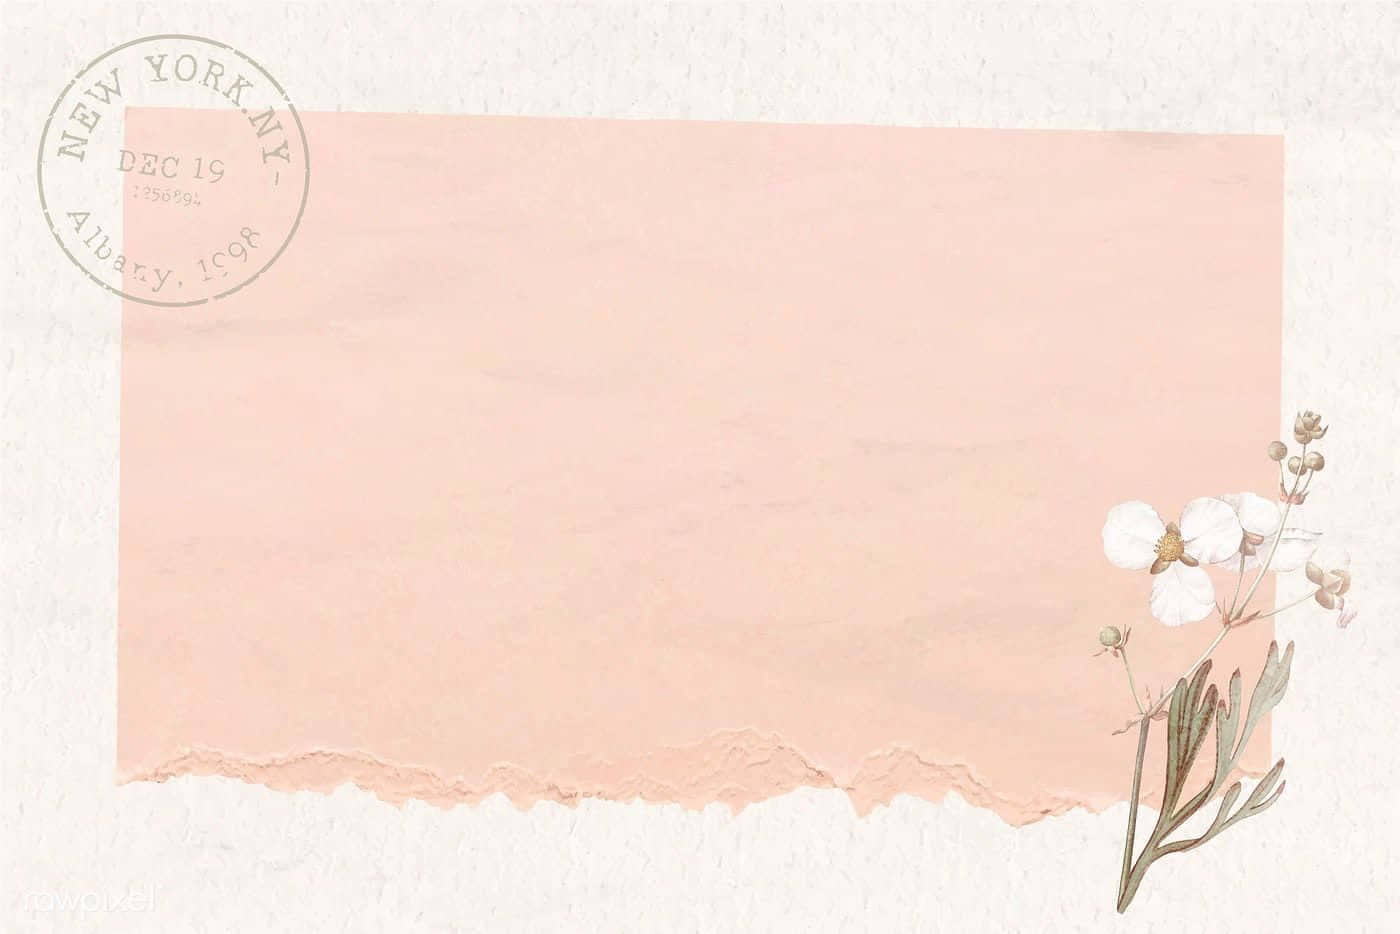 Let The Soft Hues Of Brown Pastel Aesthetic Make You Feel Peaceful. Wallpaper